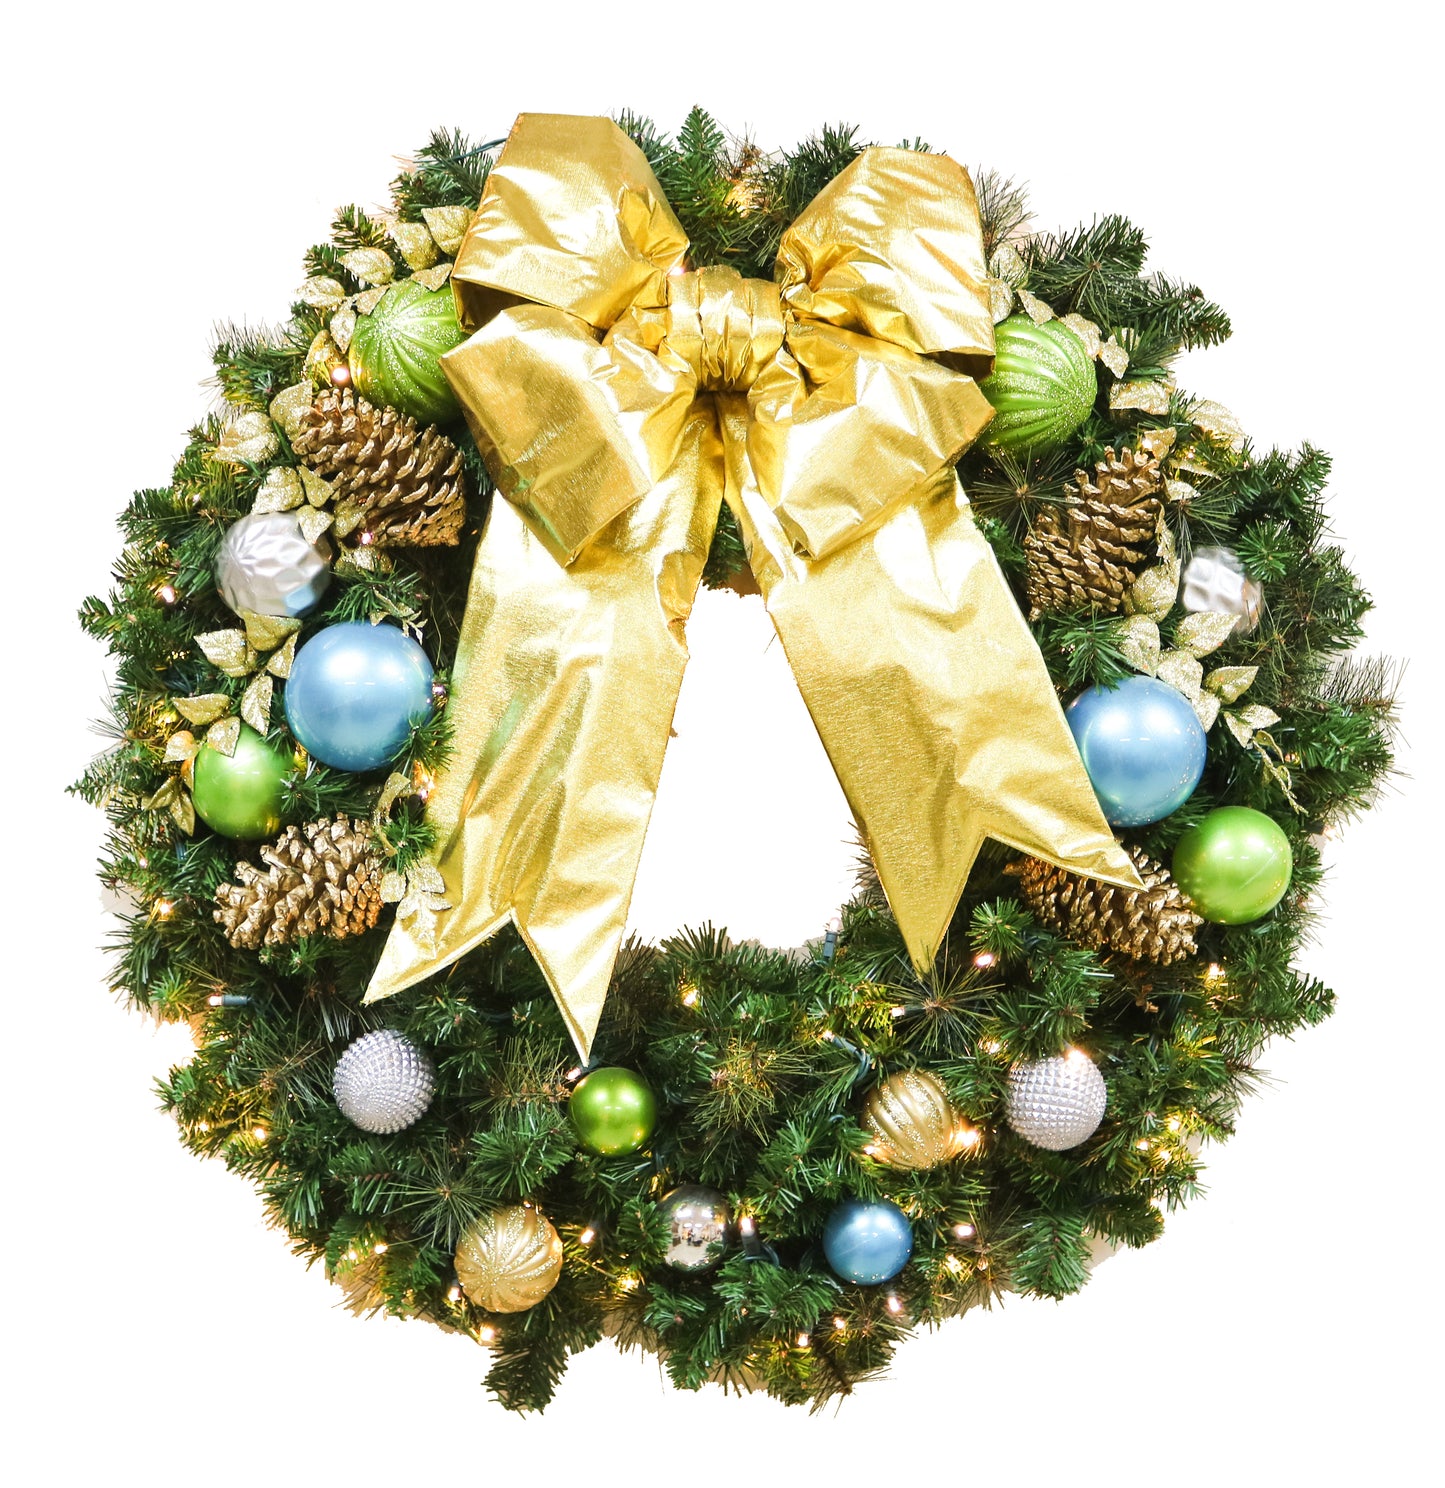 decorated christmas tree wreaths